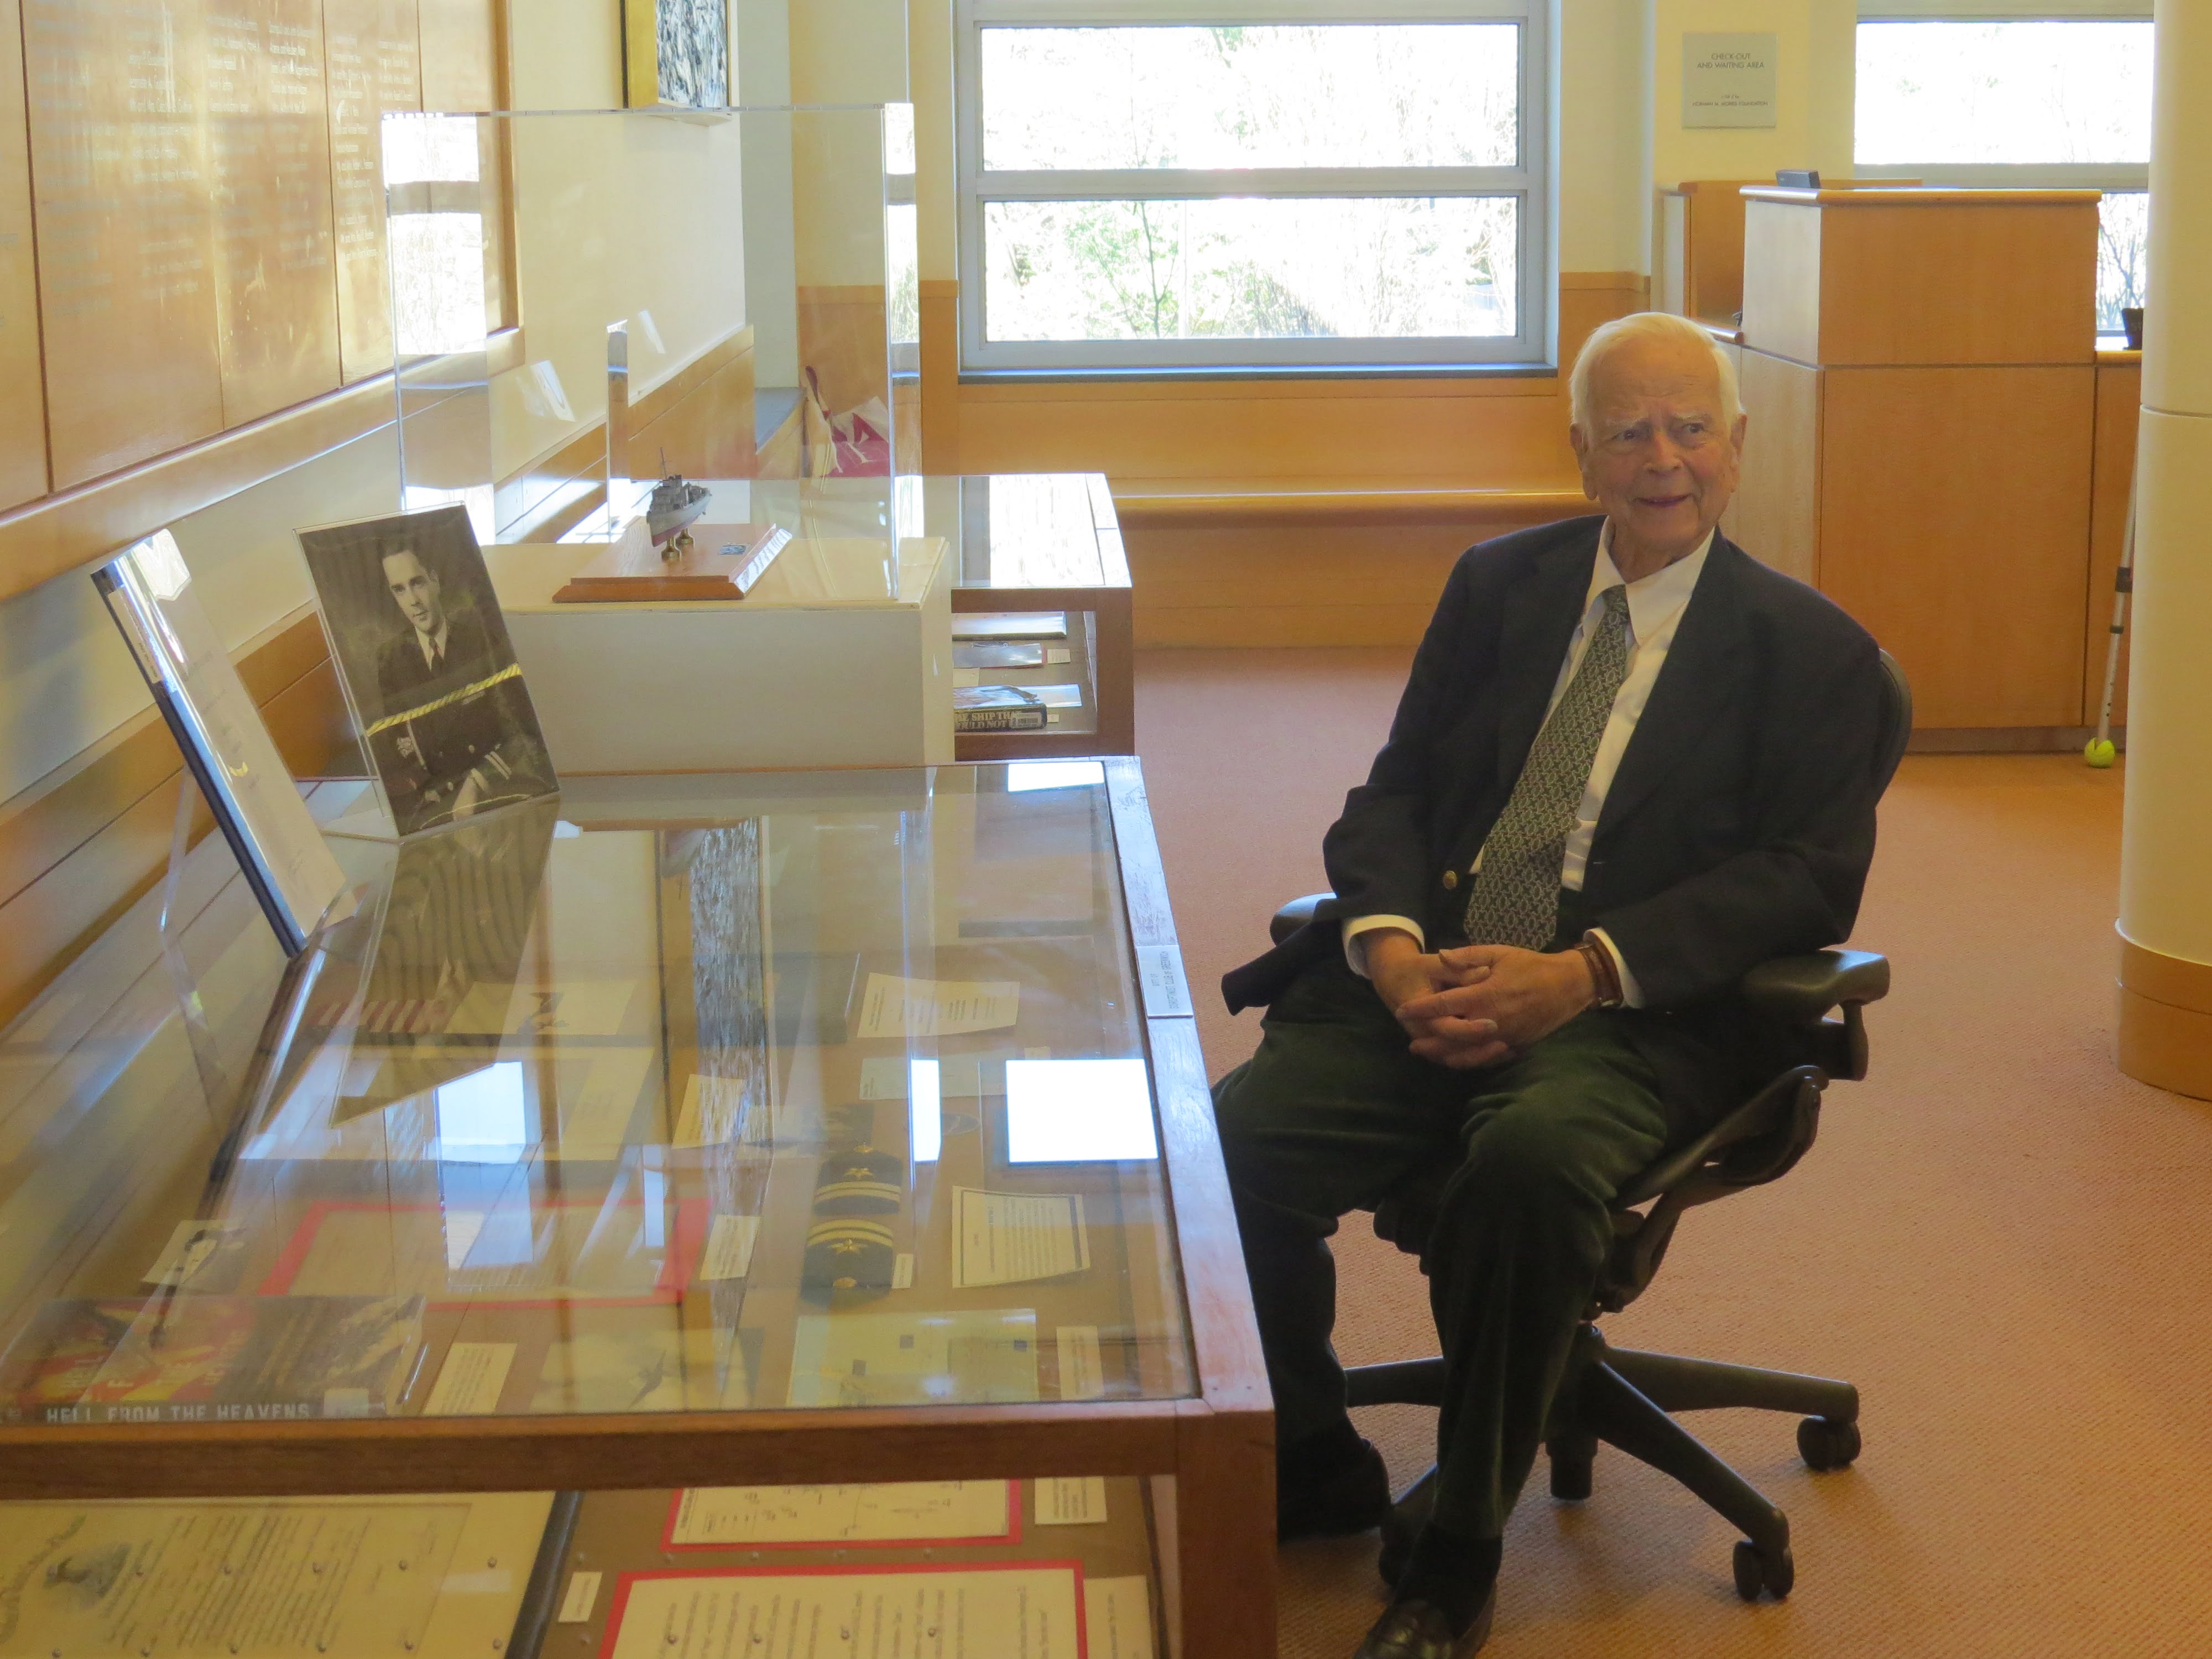 Lloyd Hull, past and present; an exhibit of the Greenwich Library Oral History Project. Photo: Joshua Littman